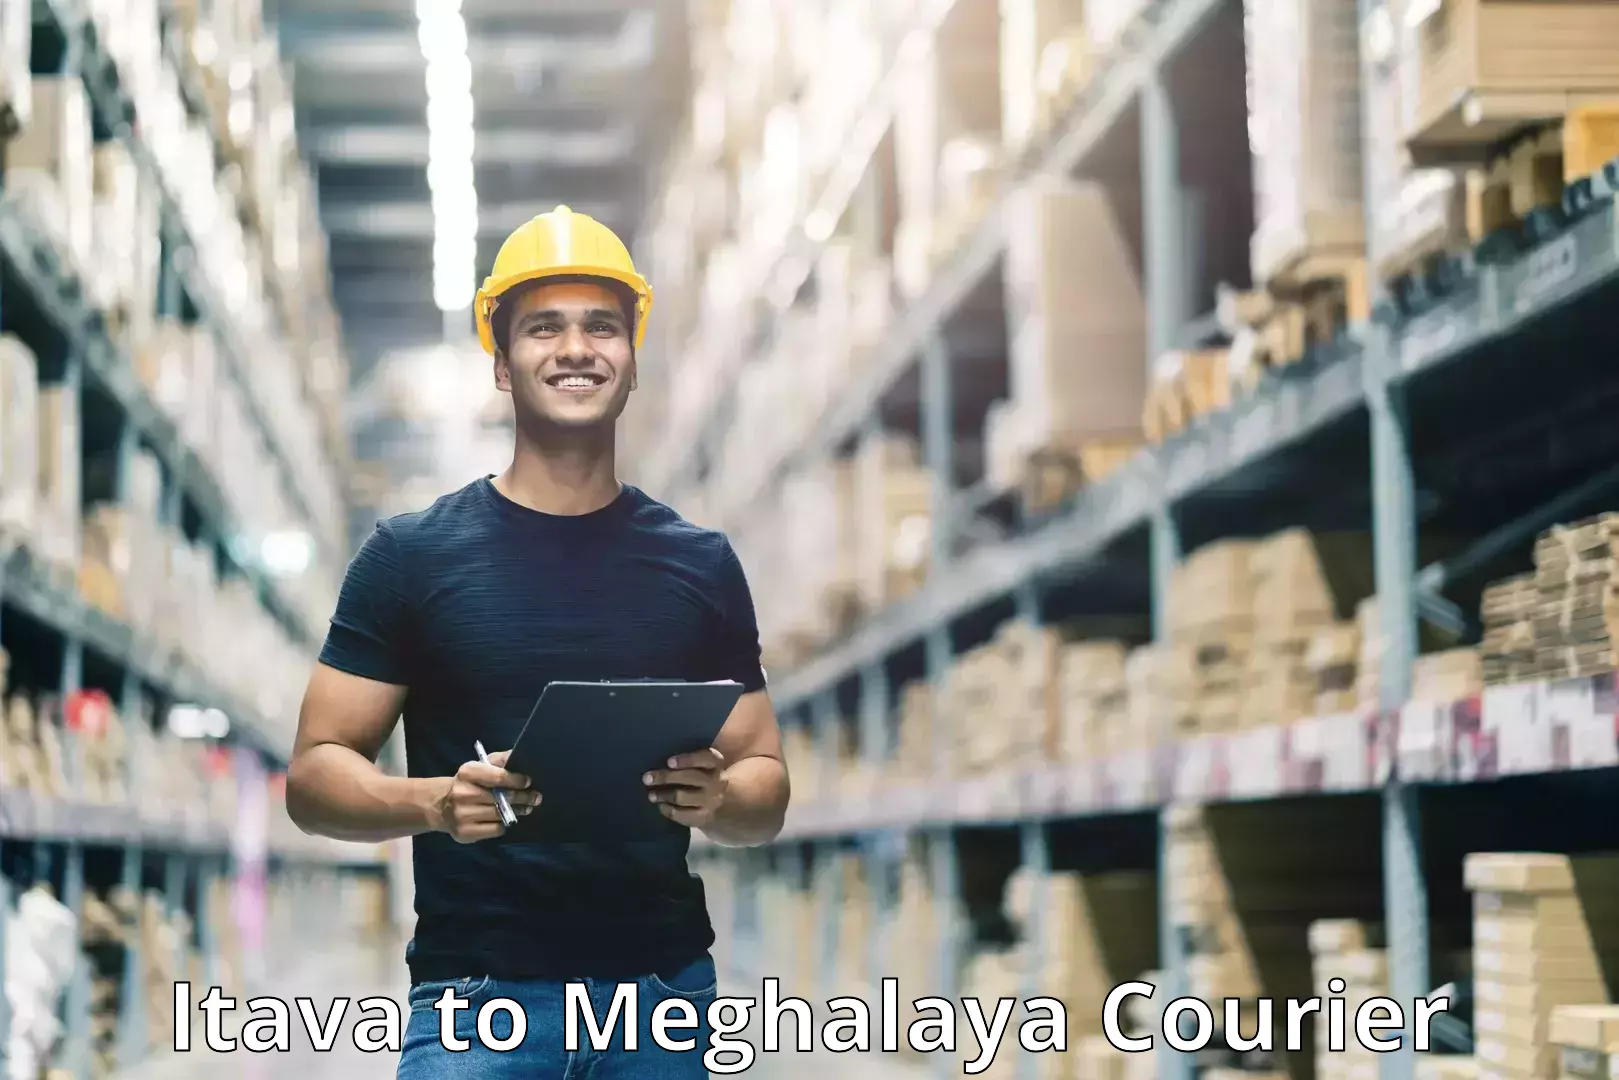 Global courier networks Itava to Shillong